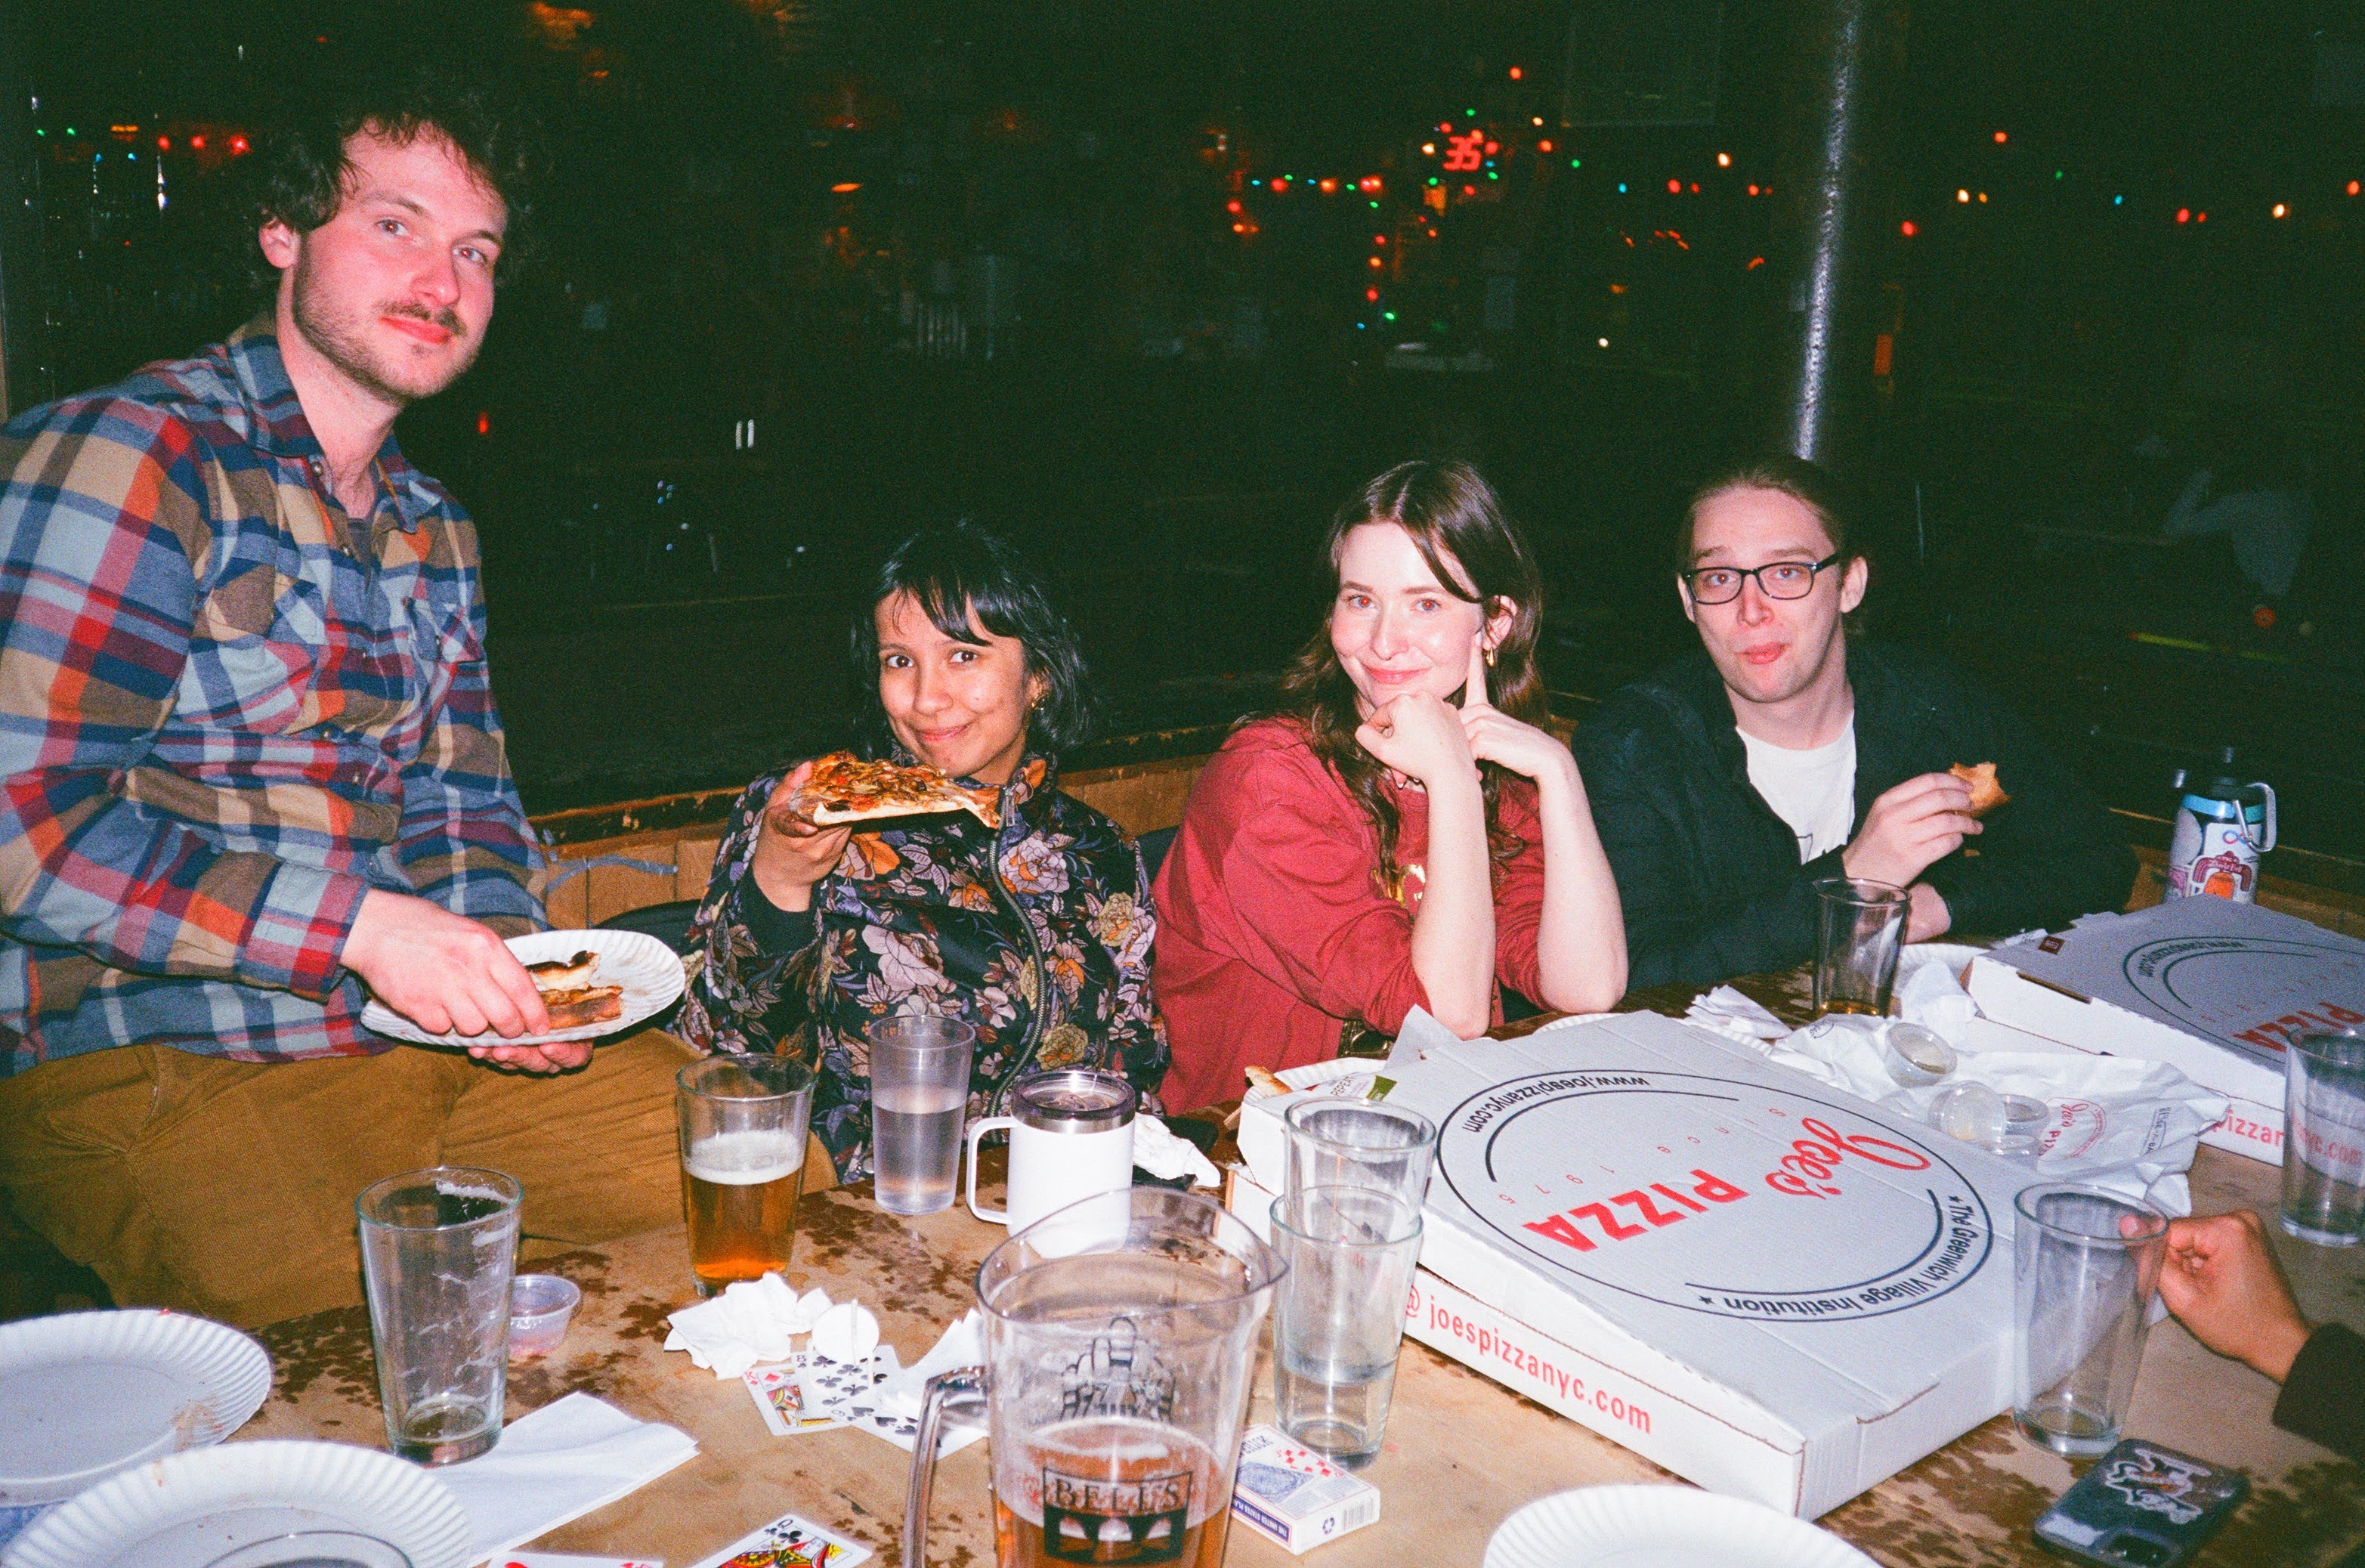 flash film photograph of beev eating pizza and boy does it look greasy